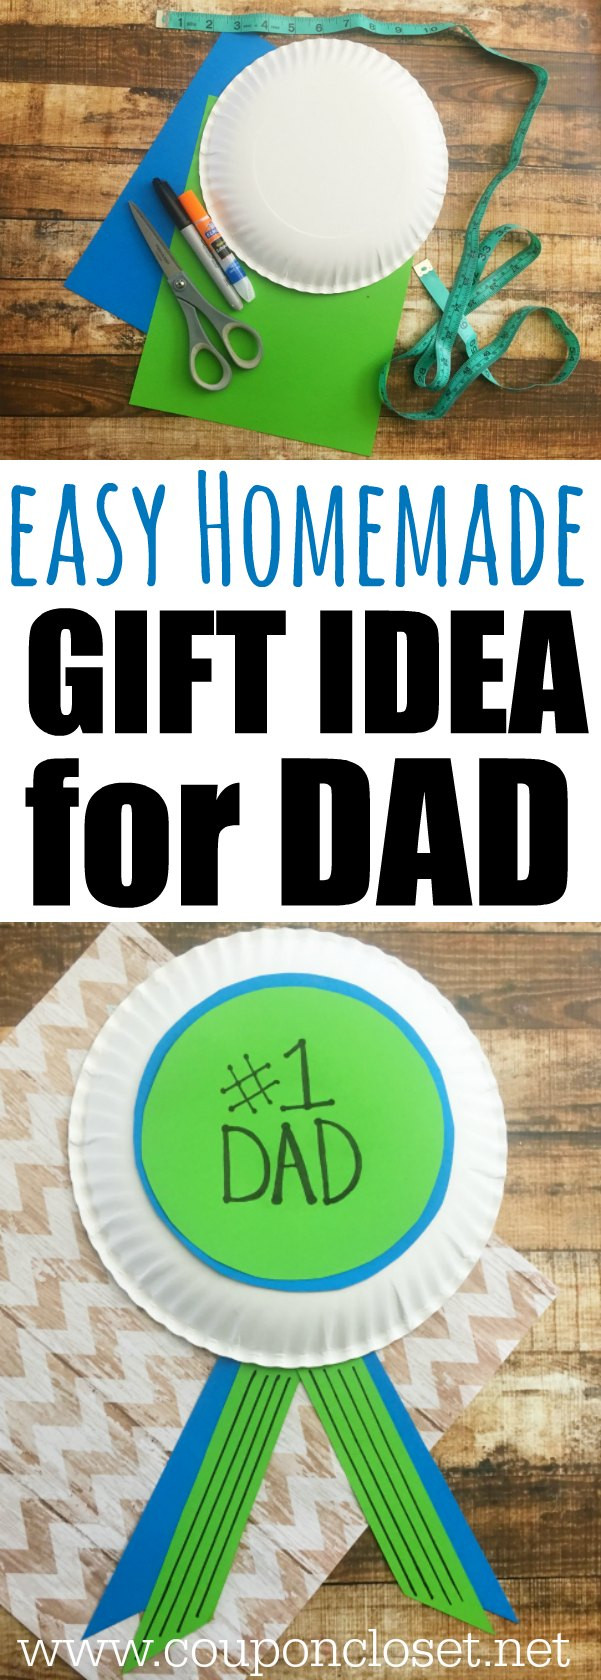 Father'S Day DIY Gifts
 Homemade Father s Day Gift Idea 1 Dad Award e Crazy Mom